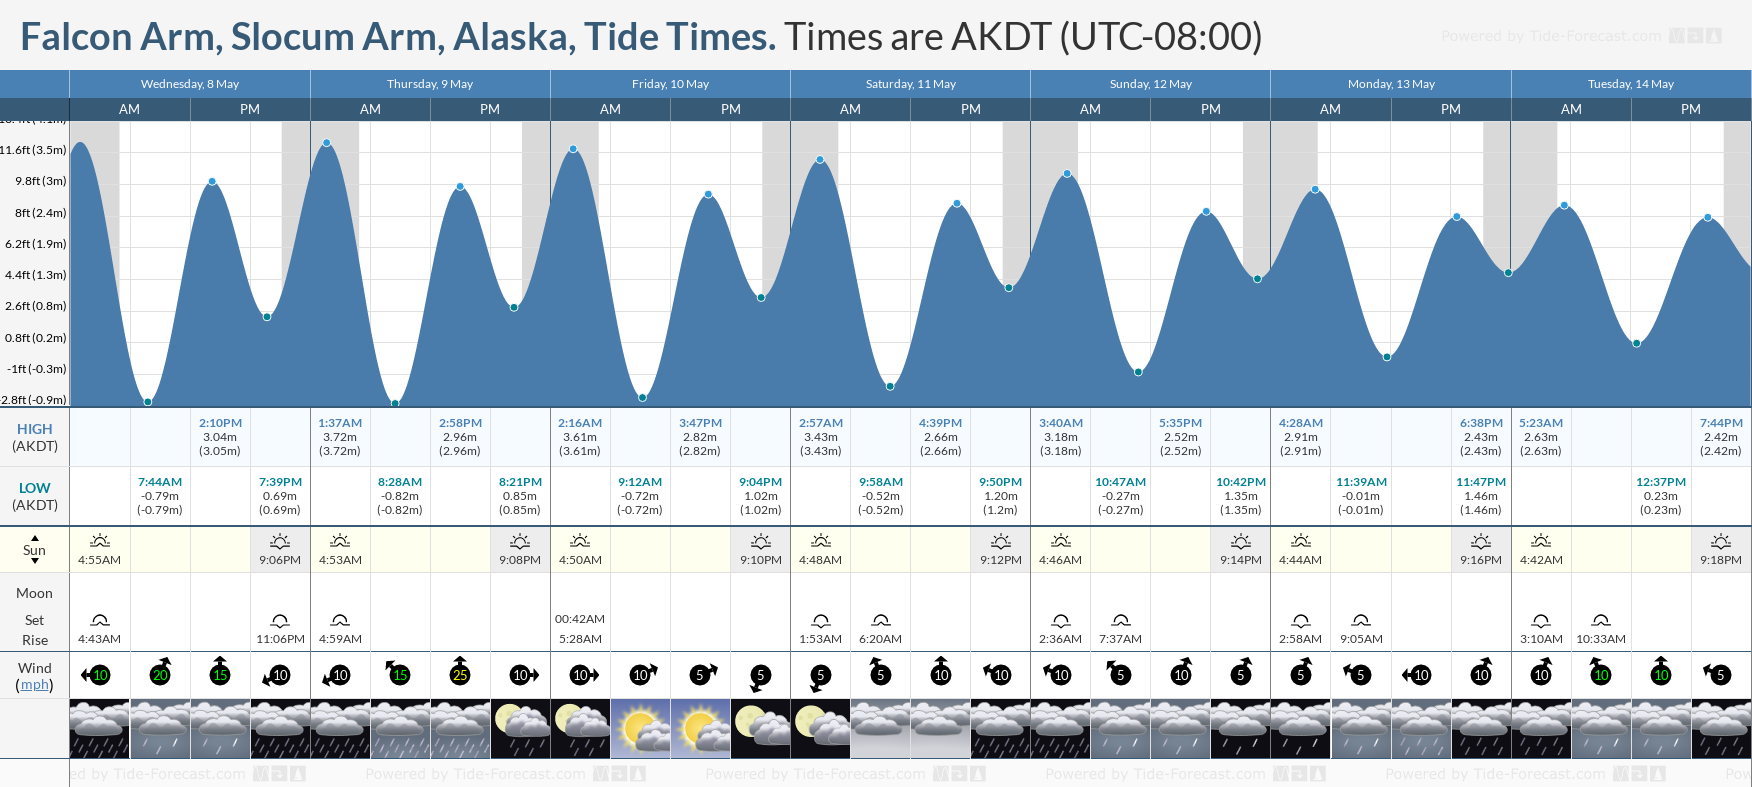 Falcon Arm, Slocum Arm, Alaska Tide Chart including high and low tide tide times for the next 7 days